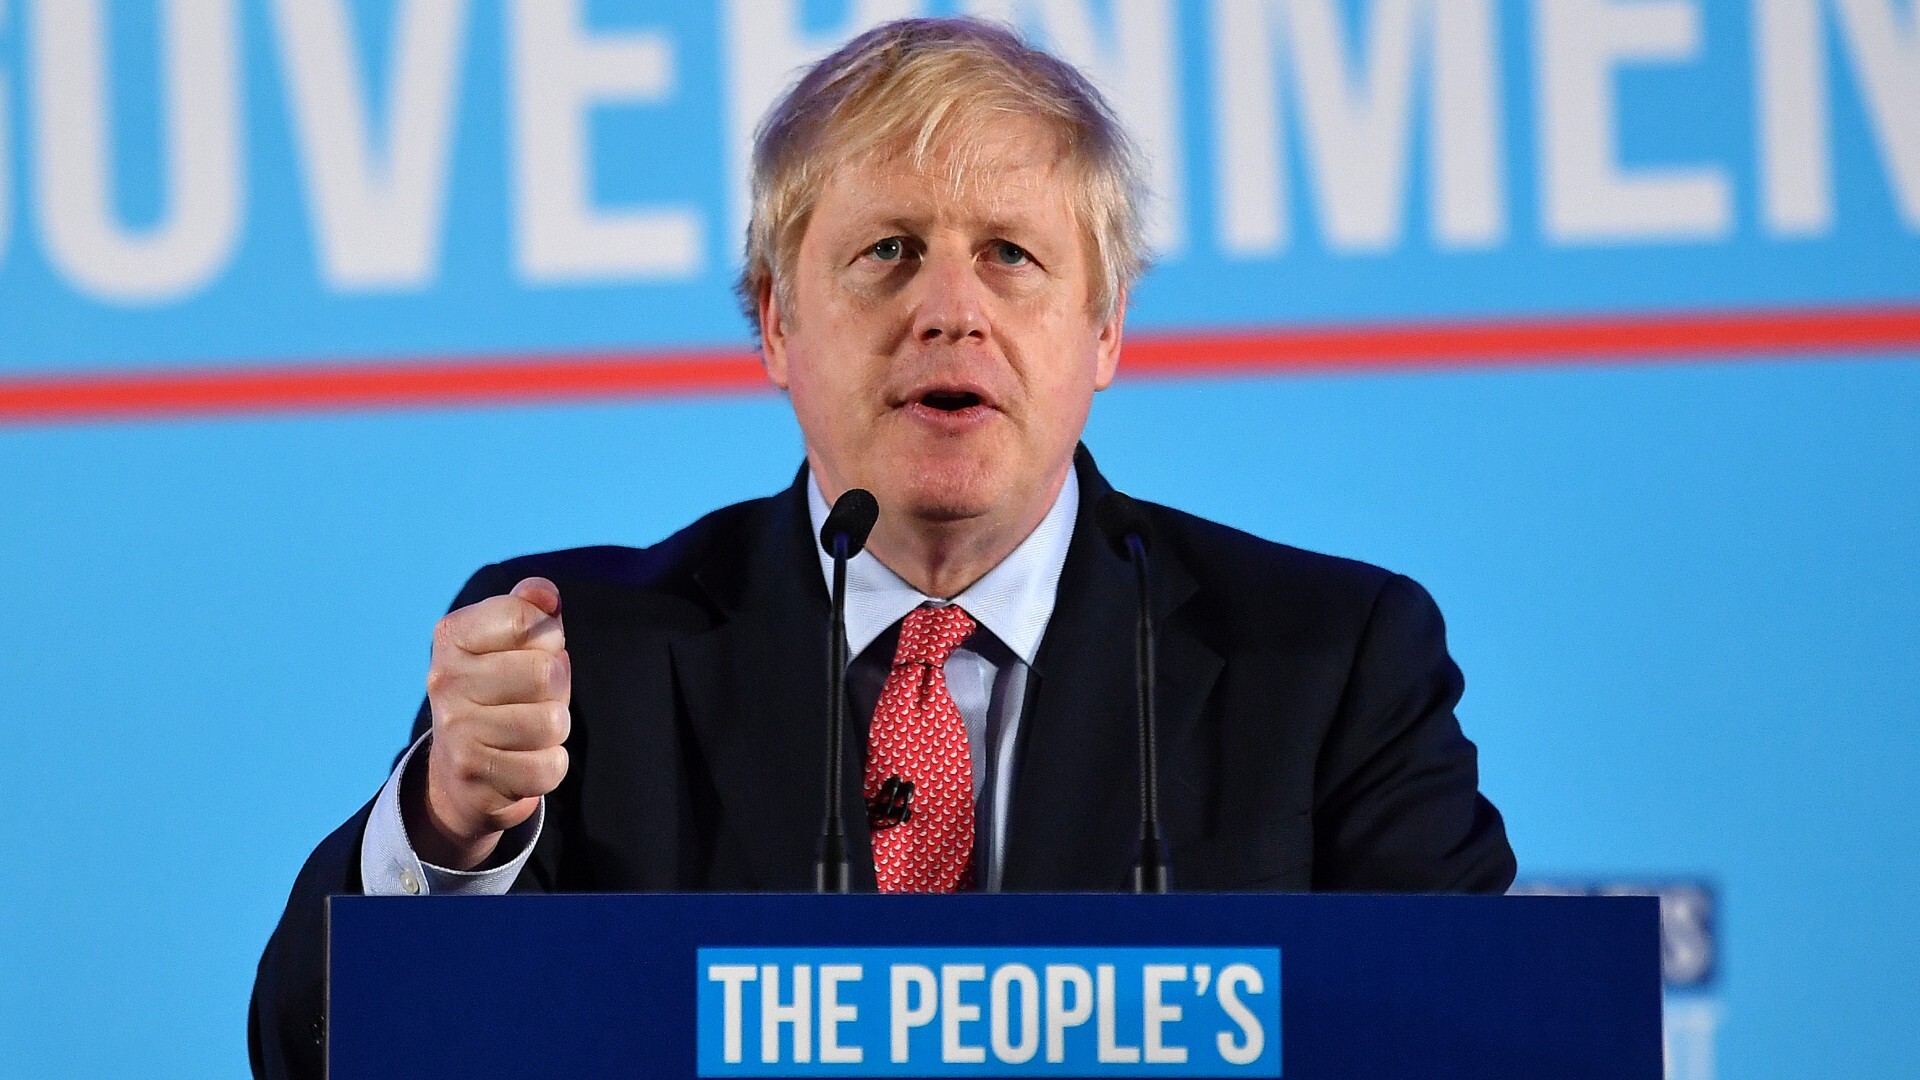 Bildresultat för After election victory, Boris Johnson promises January 31 Brexit After election win, PM Johnson makes Brexit promise and says UK will 'take back control' of borders, money and trade.